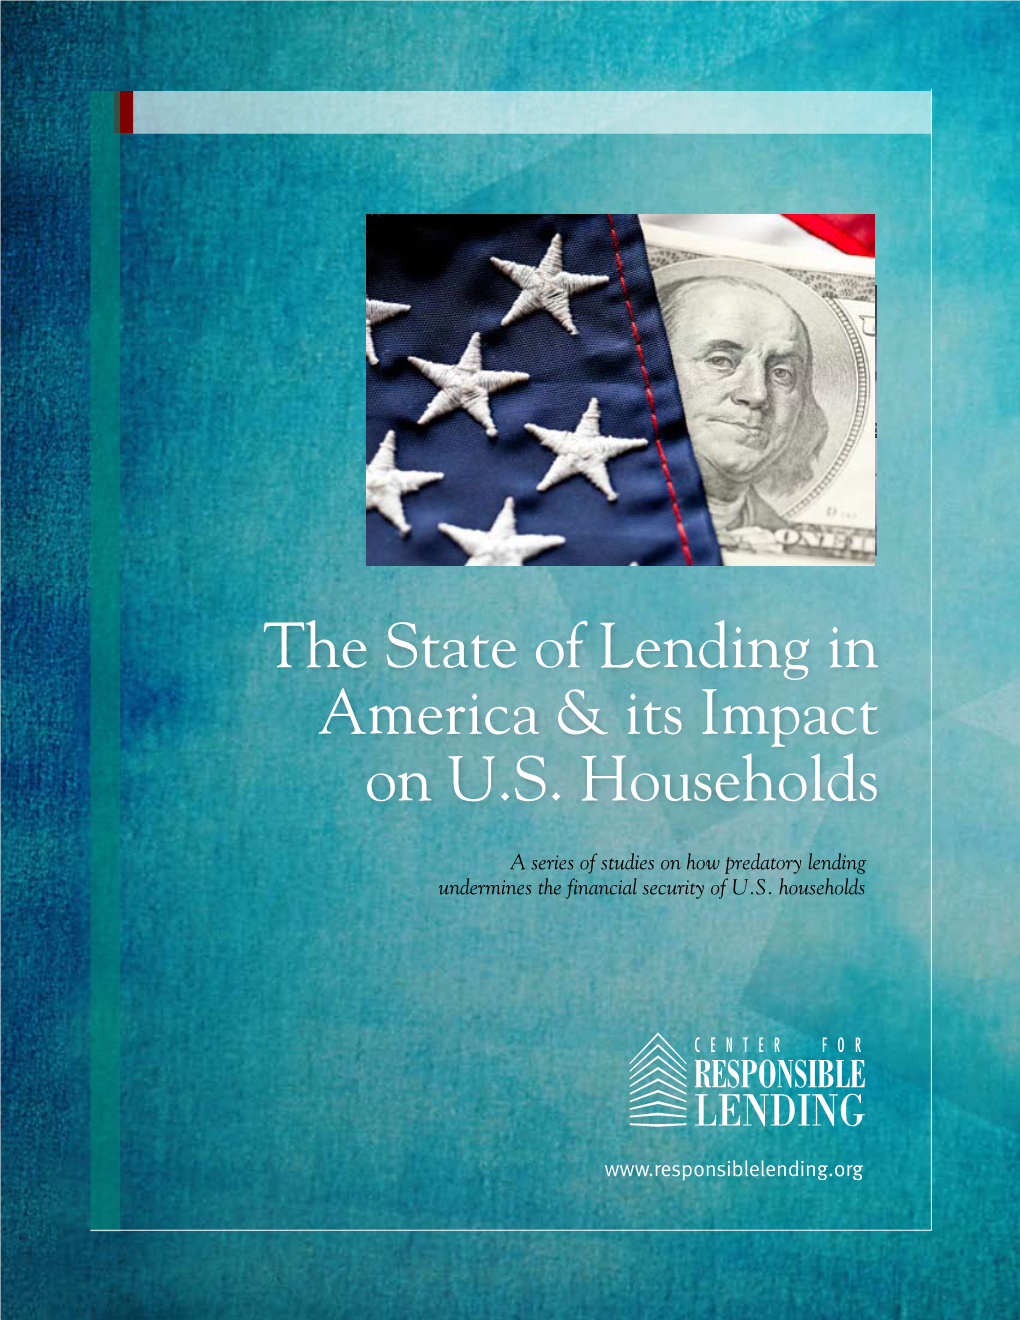 The State of Lending in America & Its